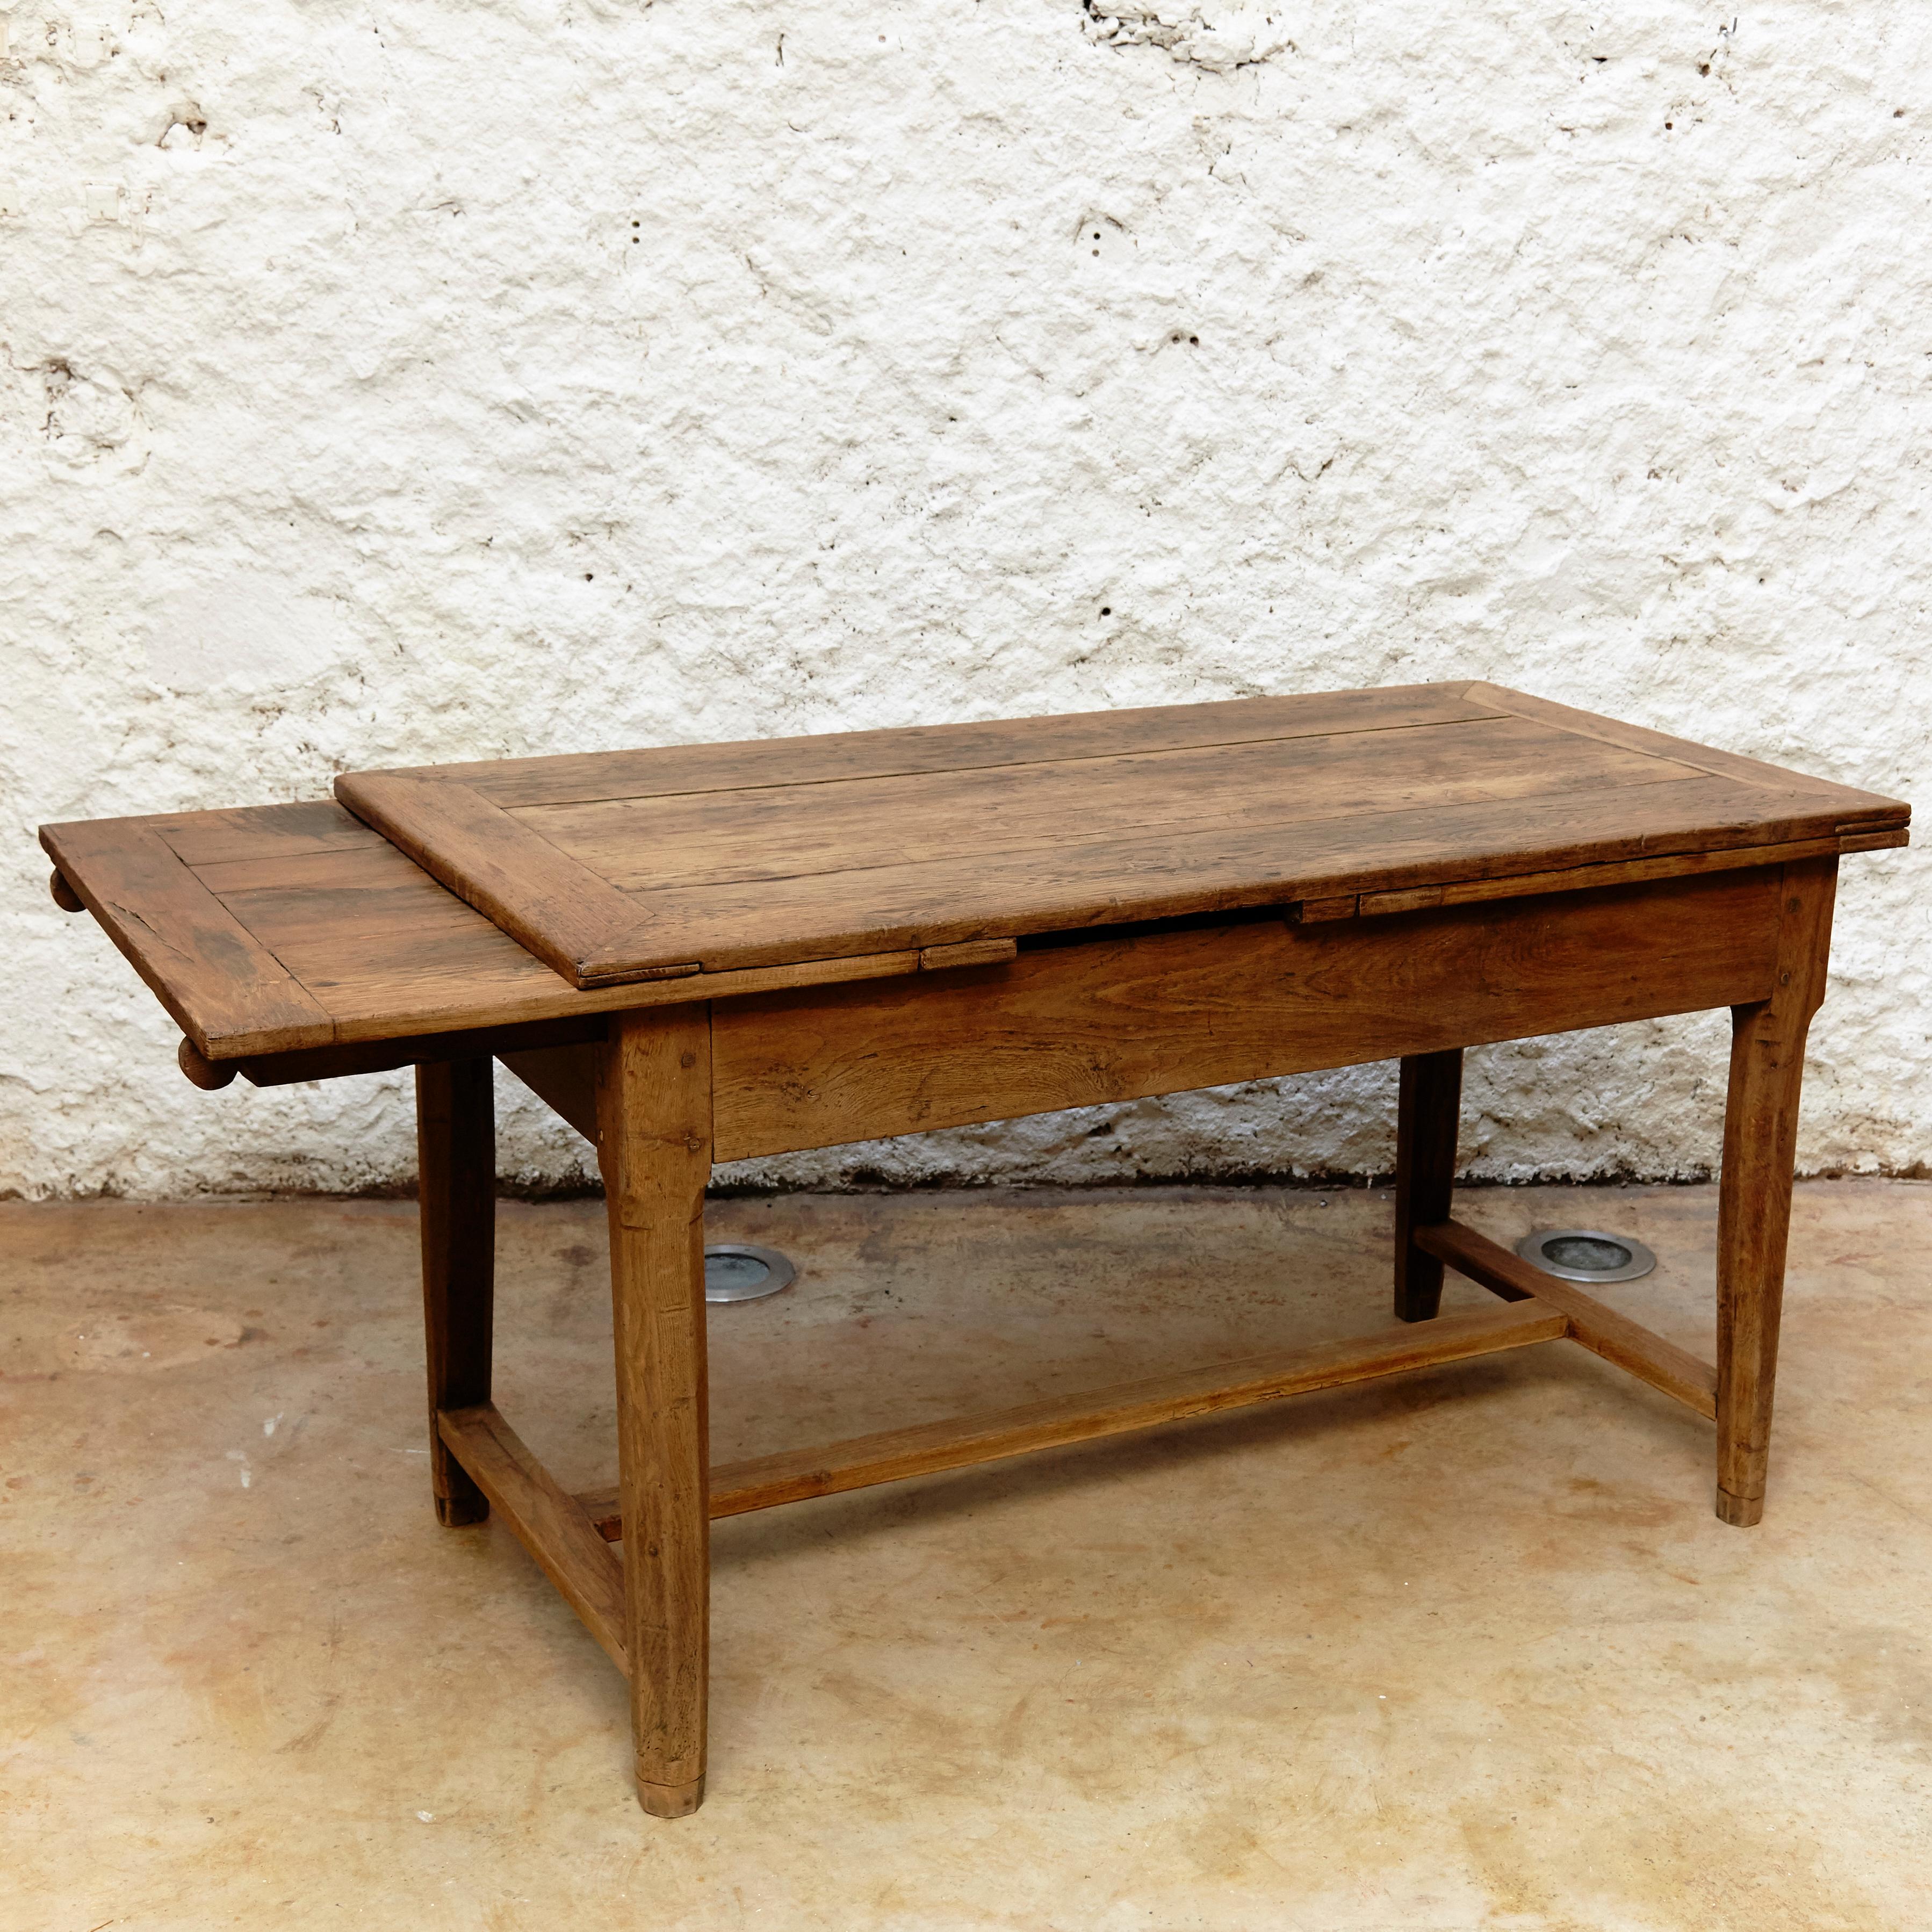 19th century rustic extensible popular oak dining table

In original condition with minor wear consistent of age and use, preserving a beautiful patina.

Measurements: 
Closed H82 x W143 x D74 cm
Open H82 x W280 x D74 cm.